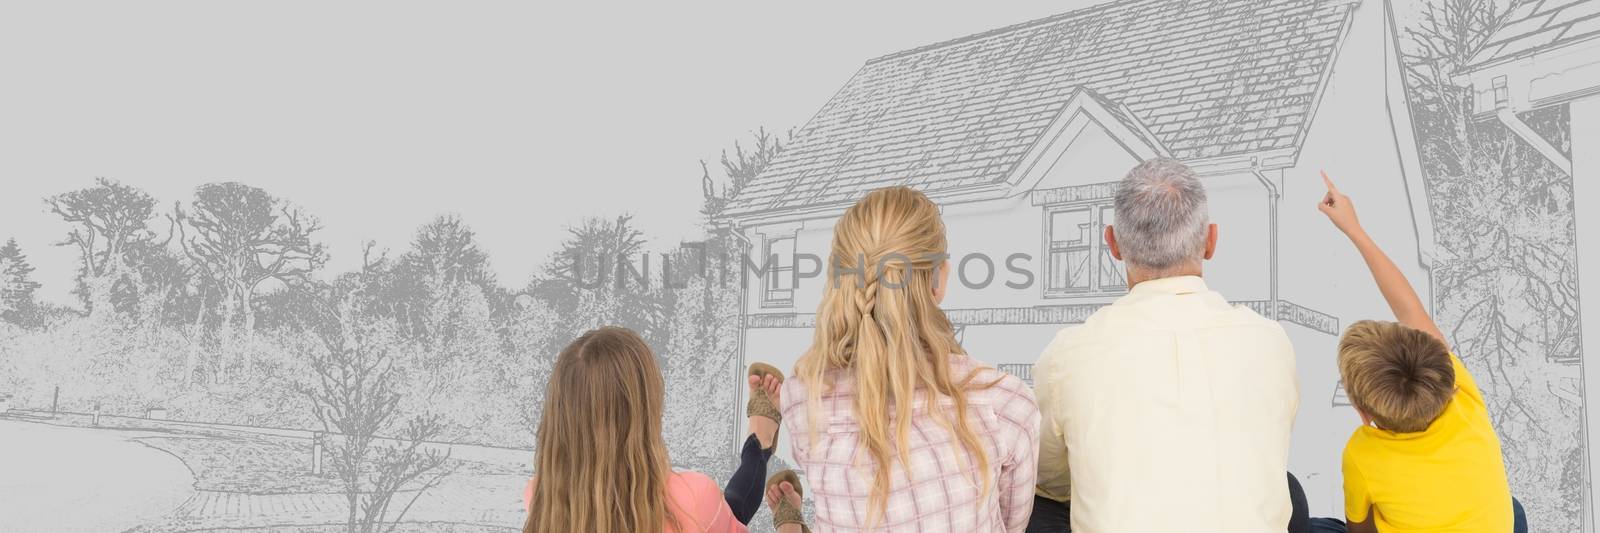 Digital composite of Family in front of house drawing sketch